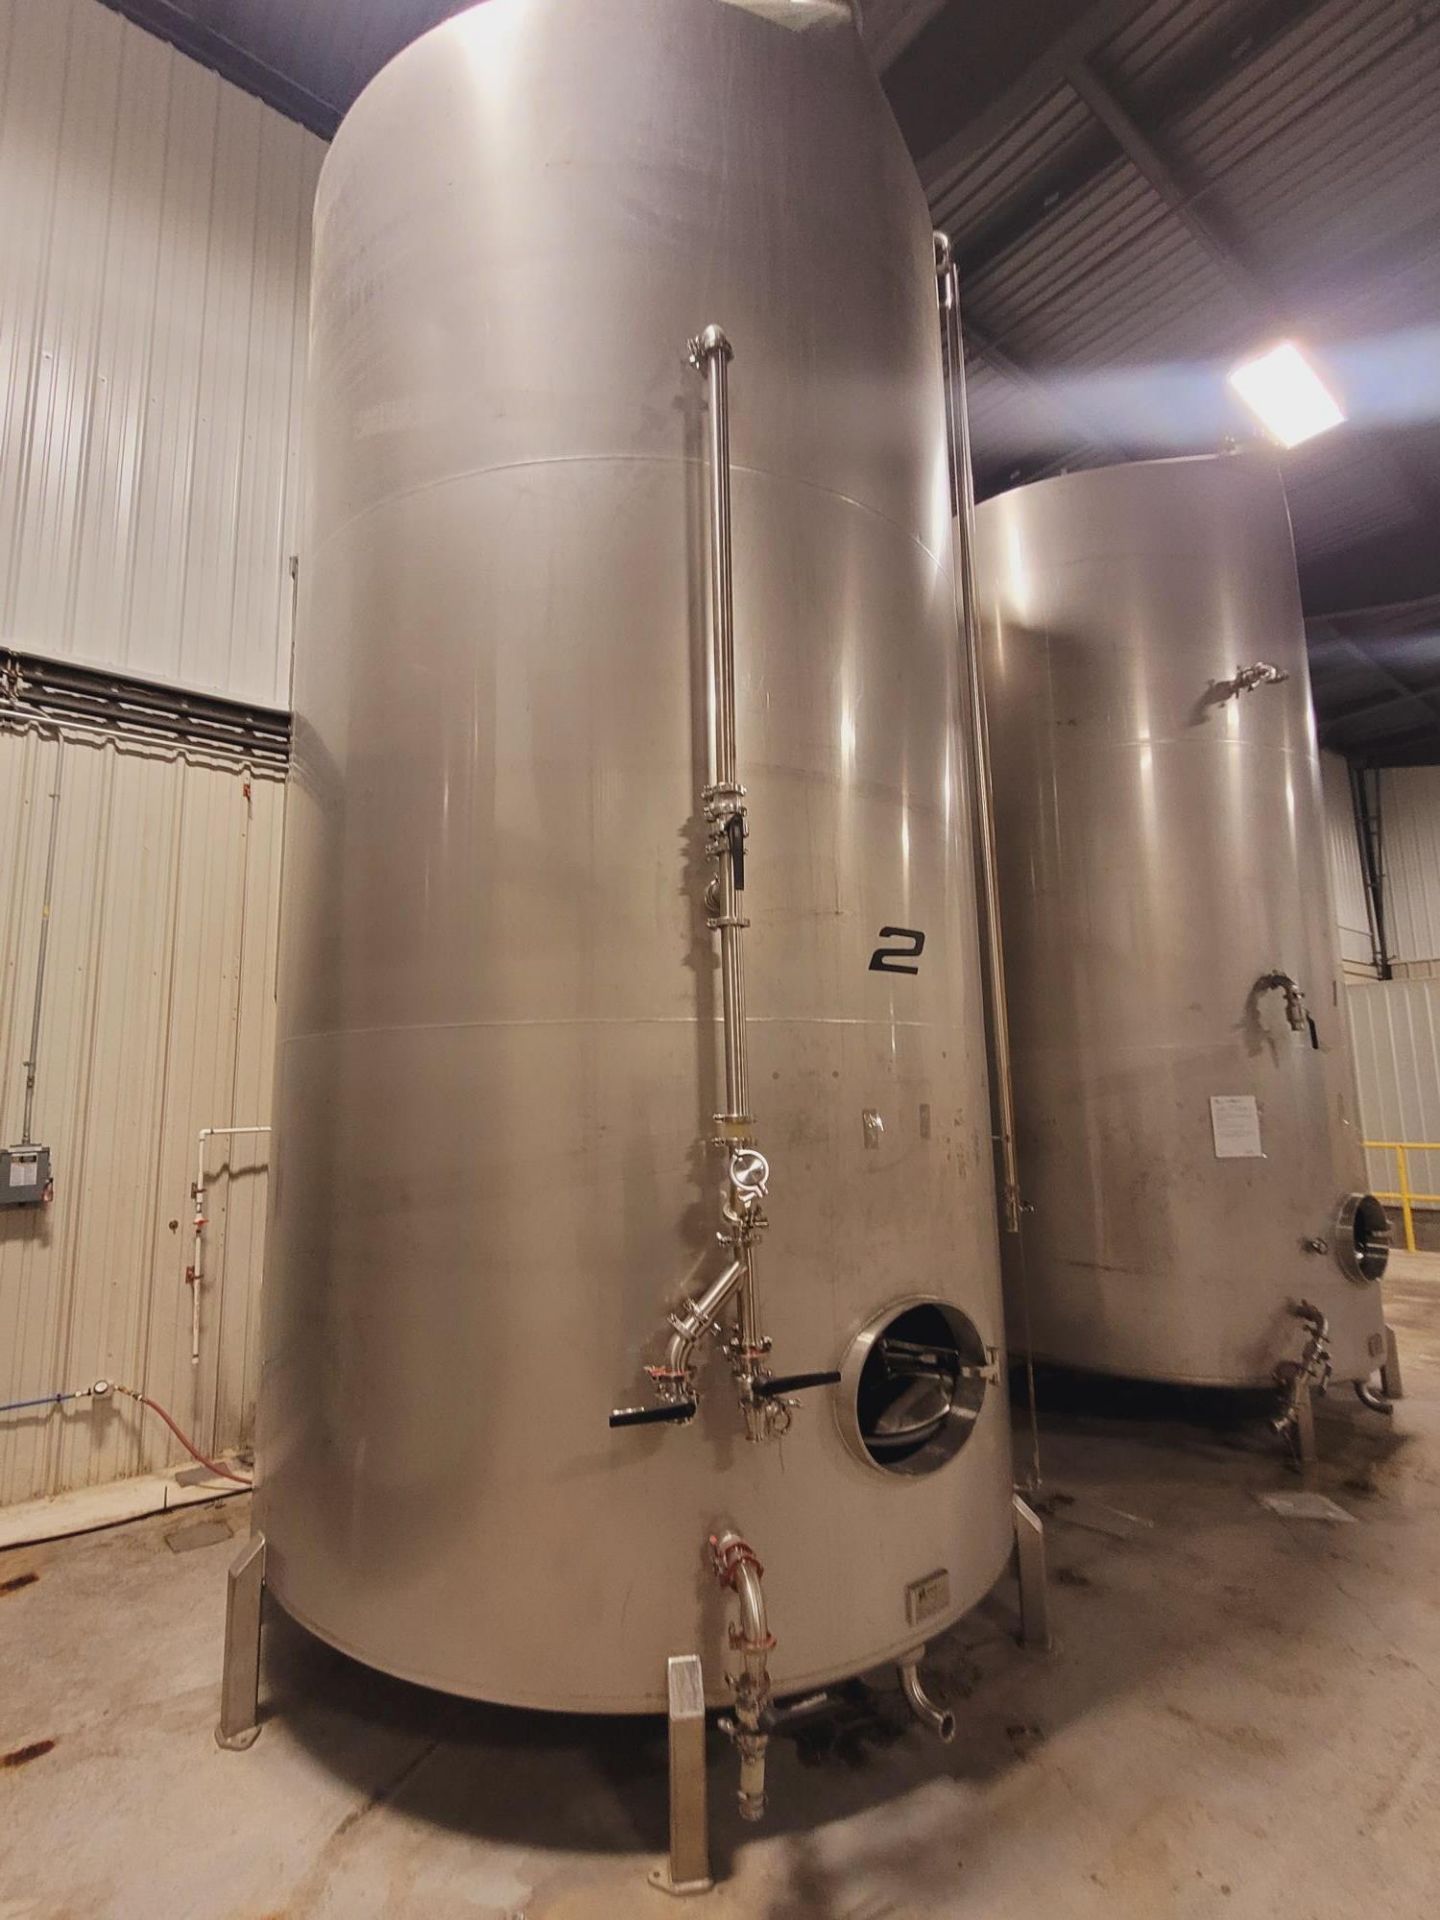 Vance Metals 6100 gallon capacity vertical type 304 stainless steel single wall storage tank. - Image 3 of 3